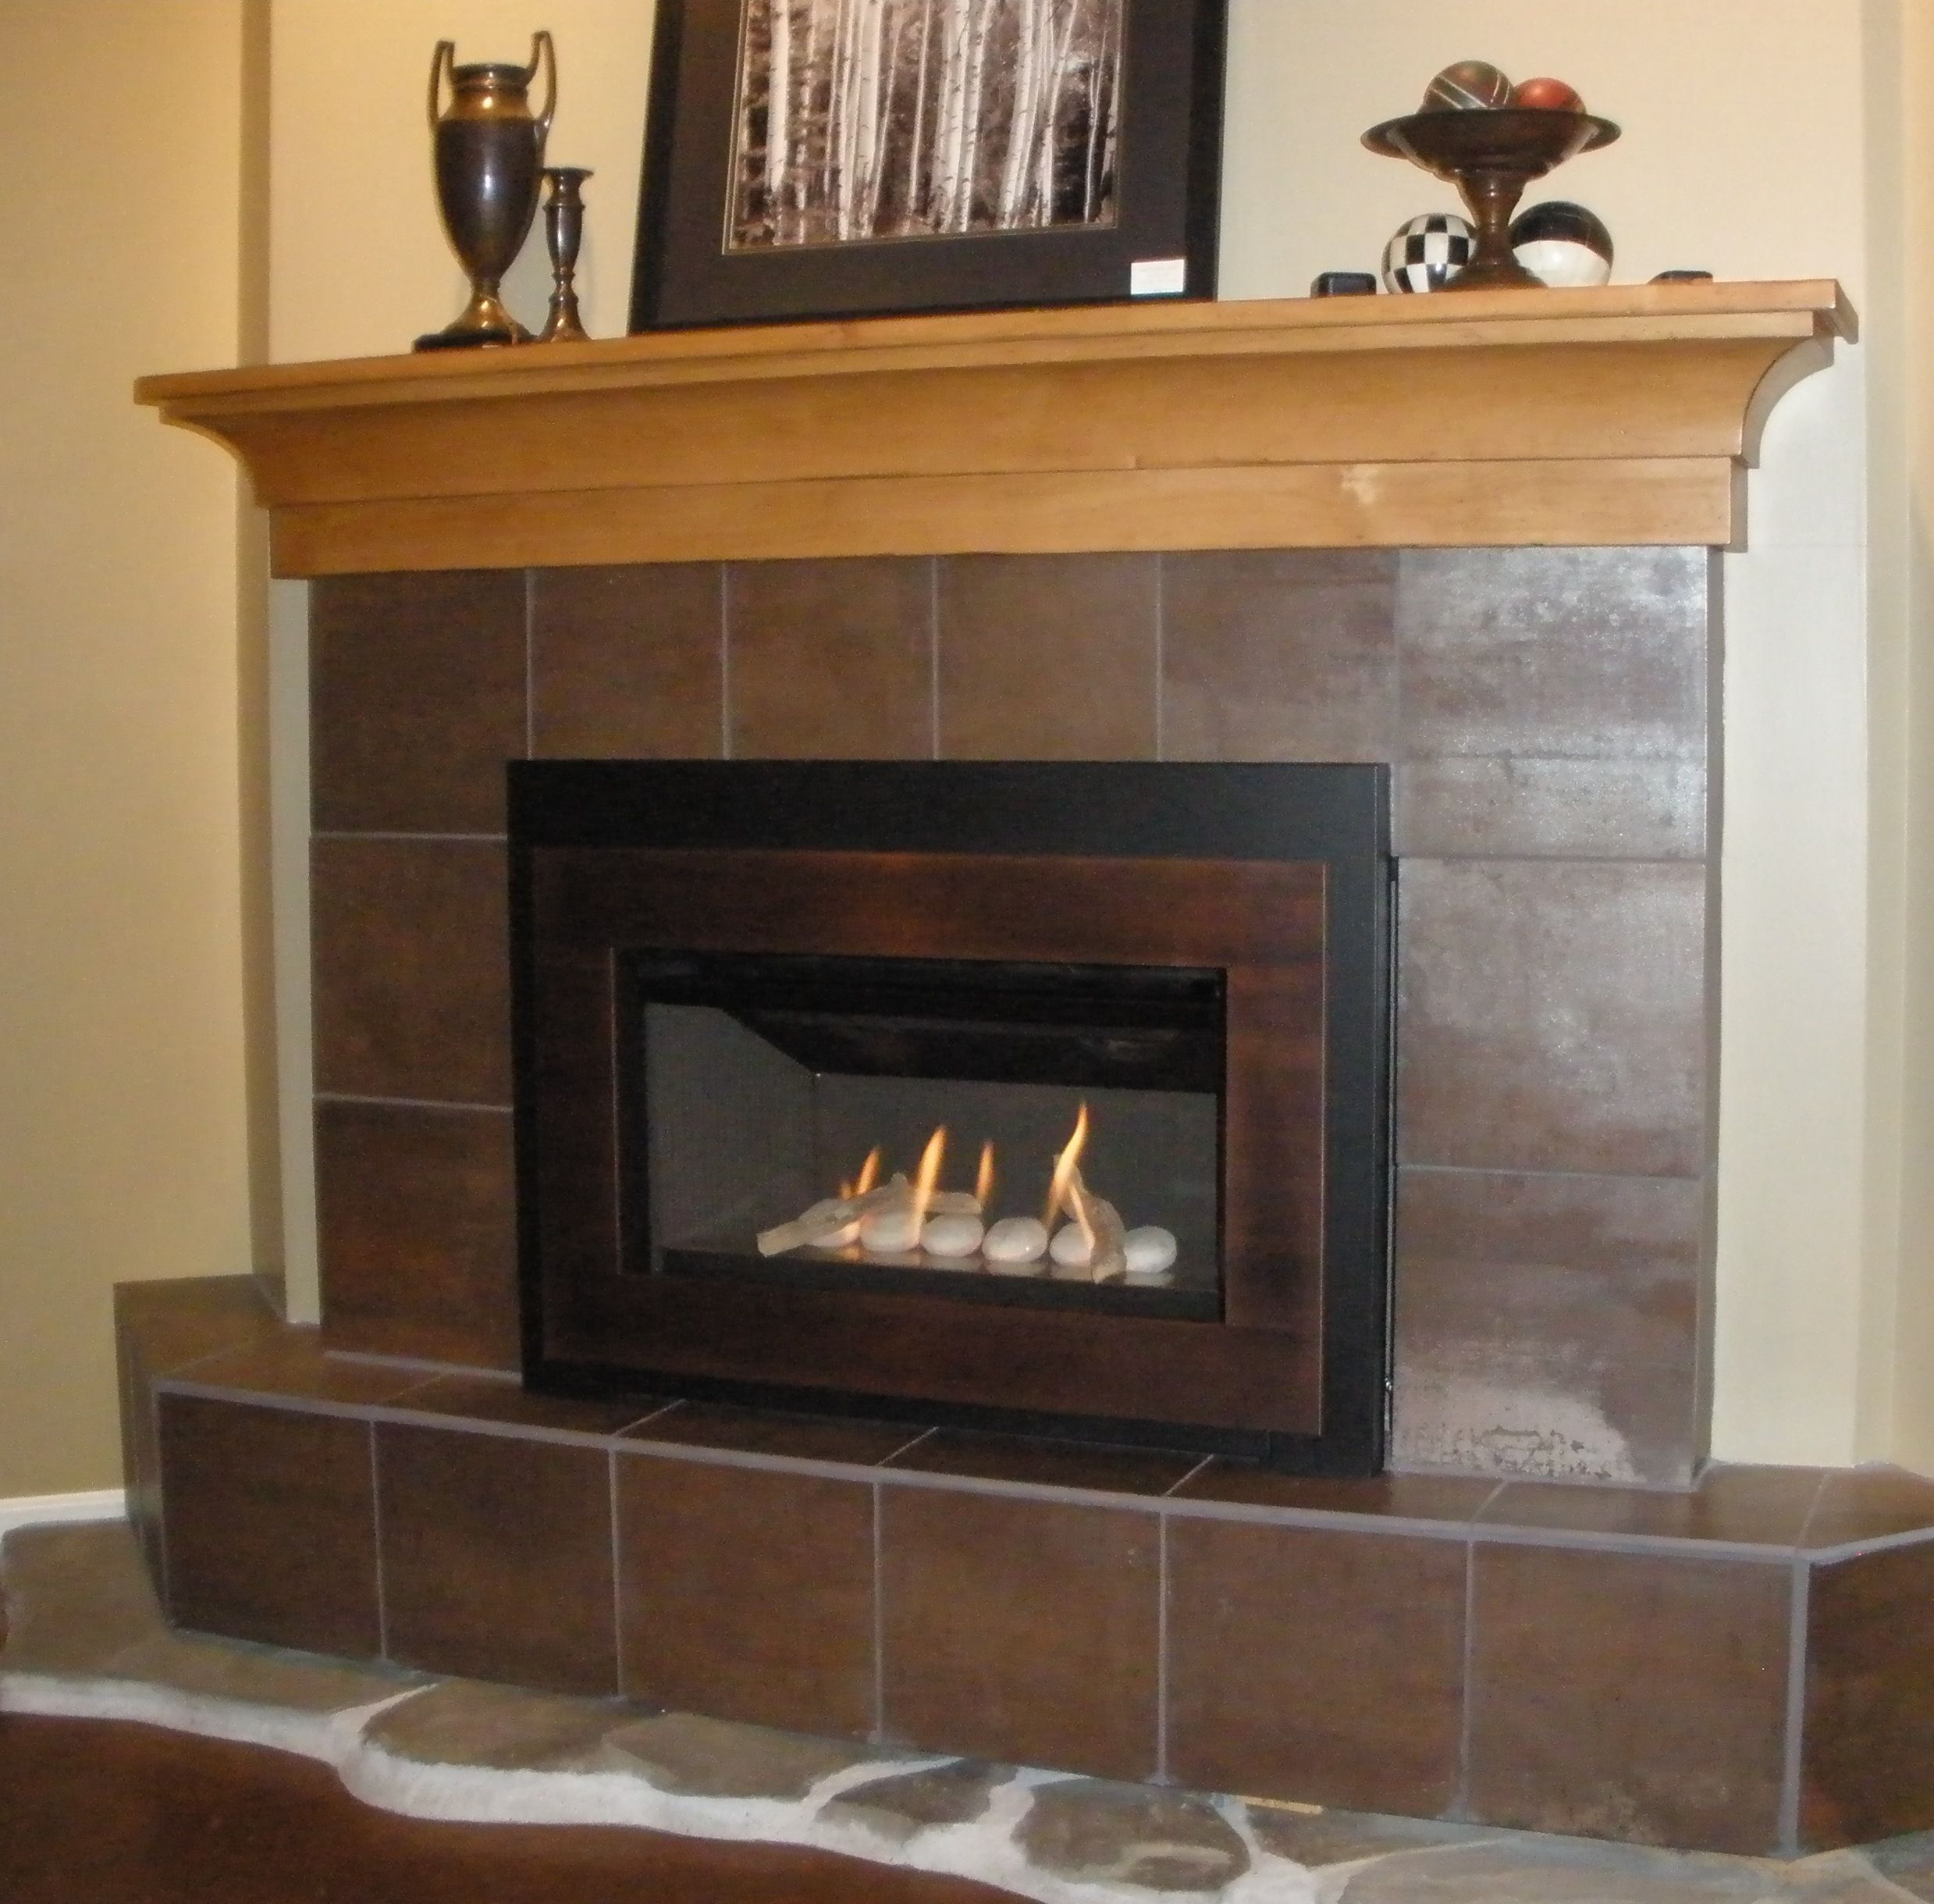 Indoor Gas Fireplace Insert Awesome Pin On Valor Radiant Gas Fireplaces Midwest Dealer